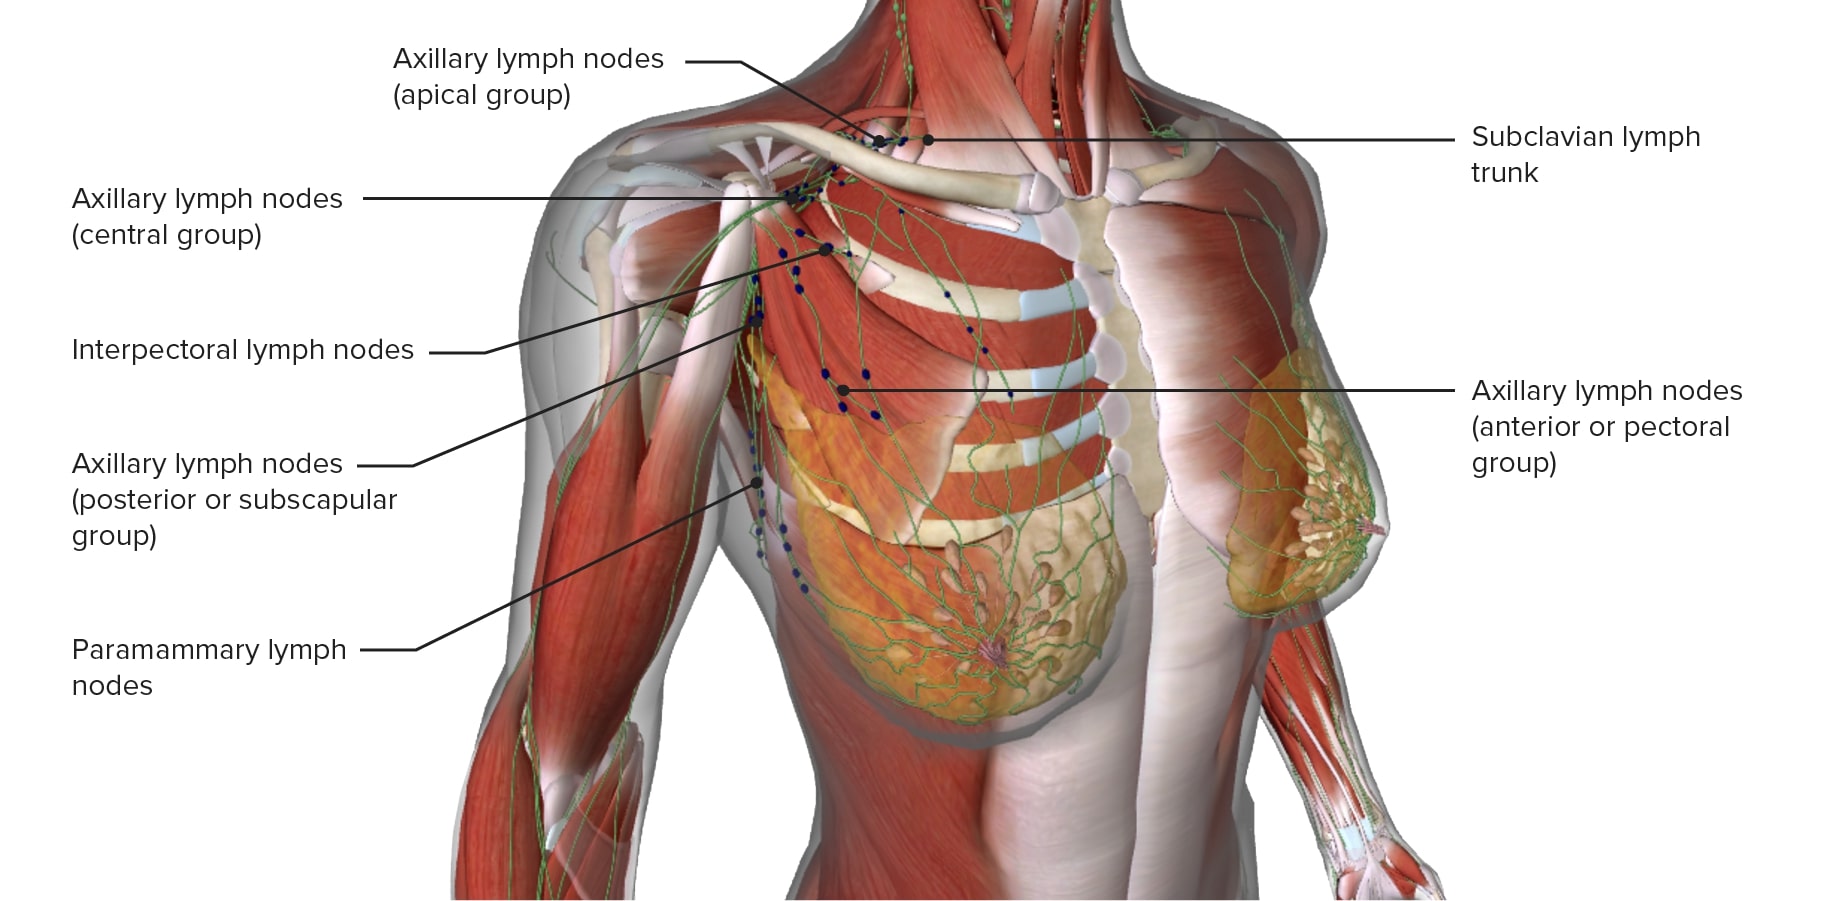 https://cdn.lecturio.com/assets/Lymphatic-drainage-of-the-breast.jpg